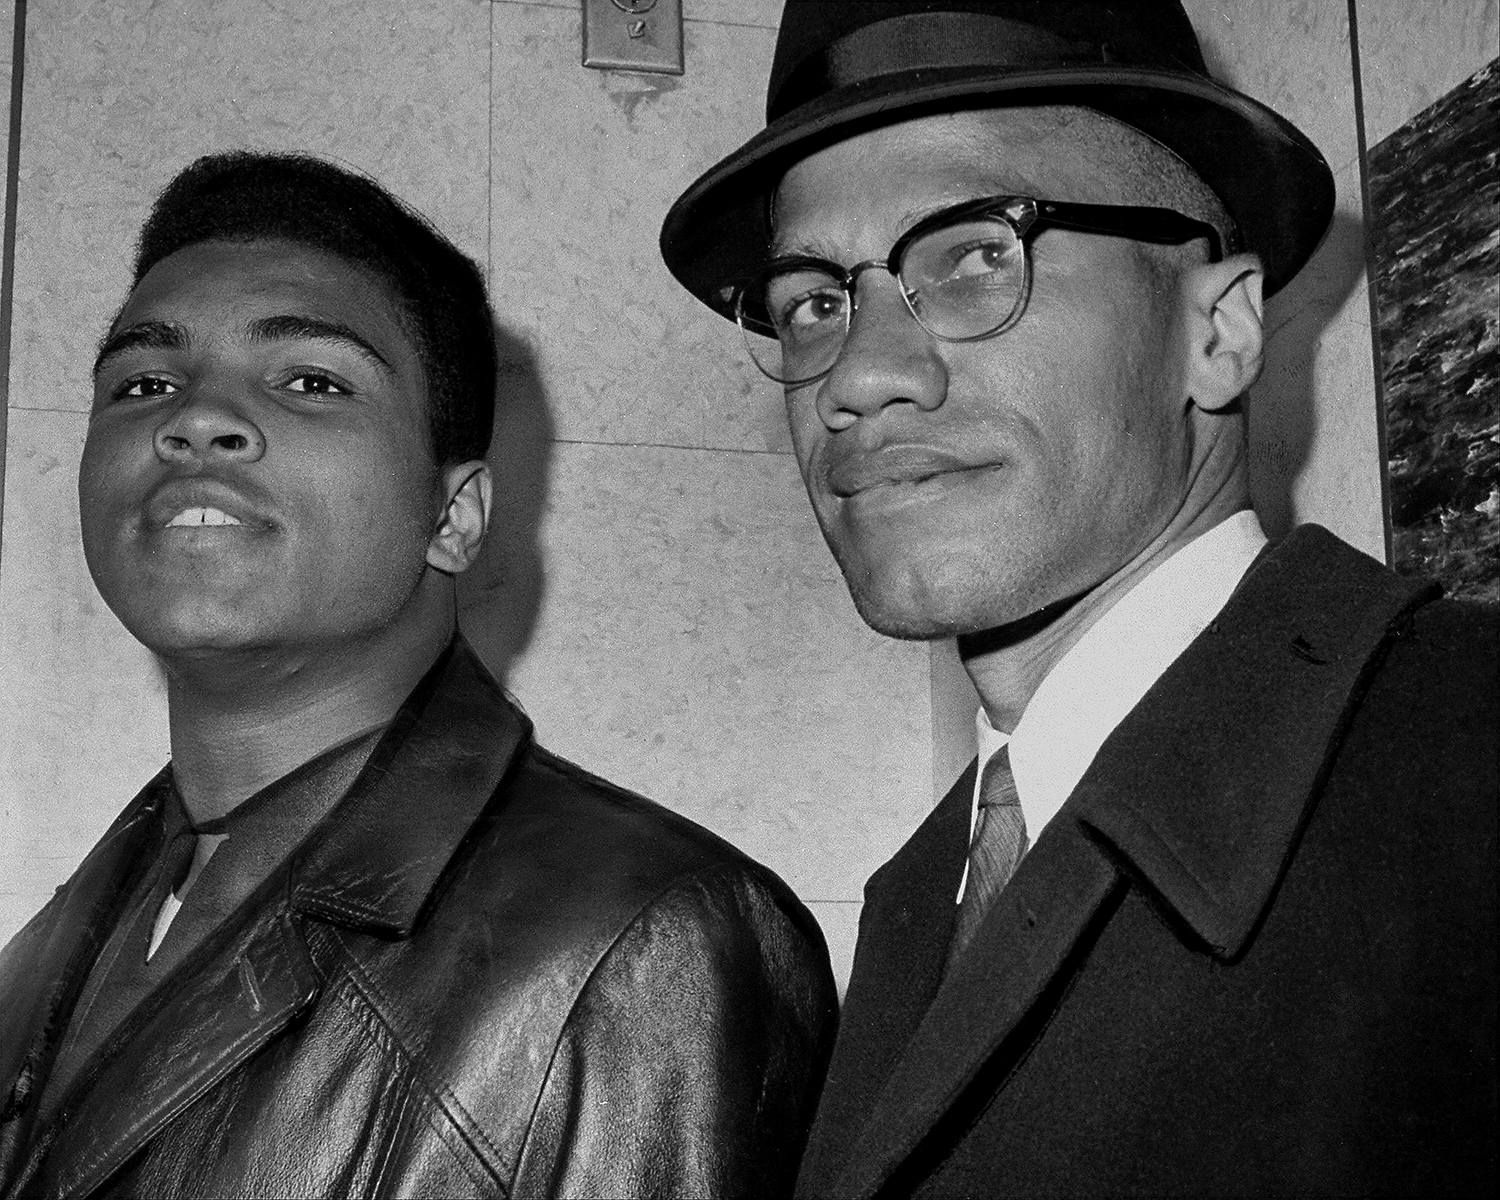 Muhammad Ali with Nation of Islam leader Malcolm X